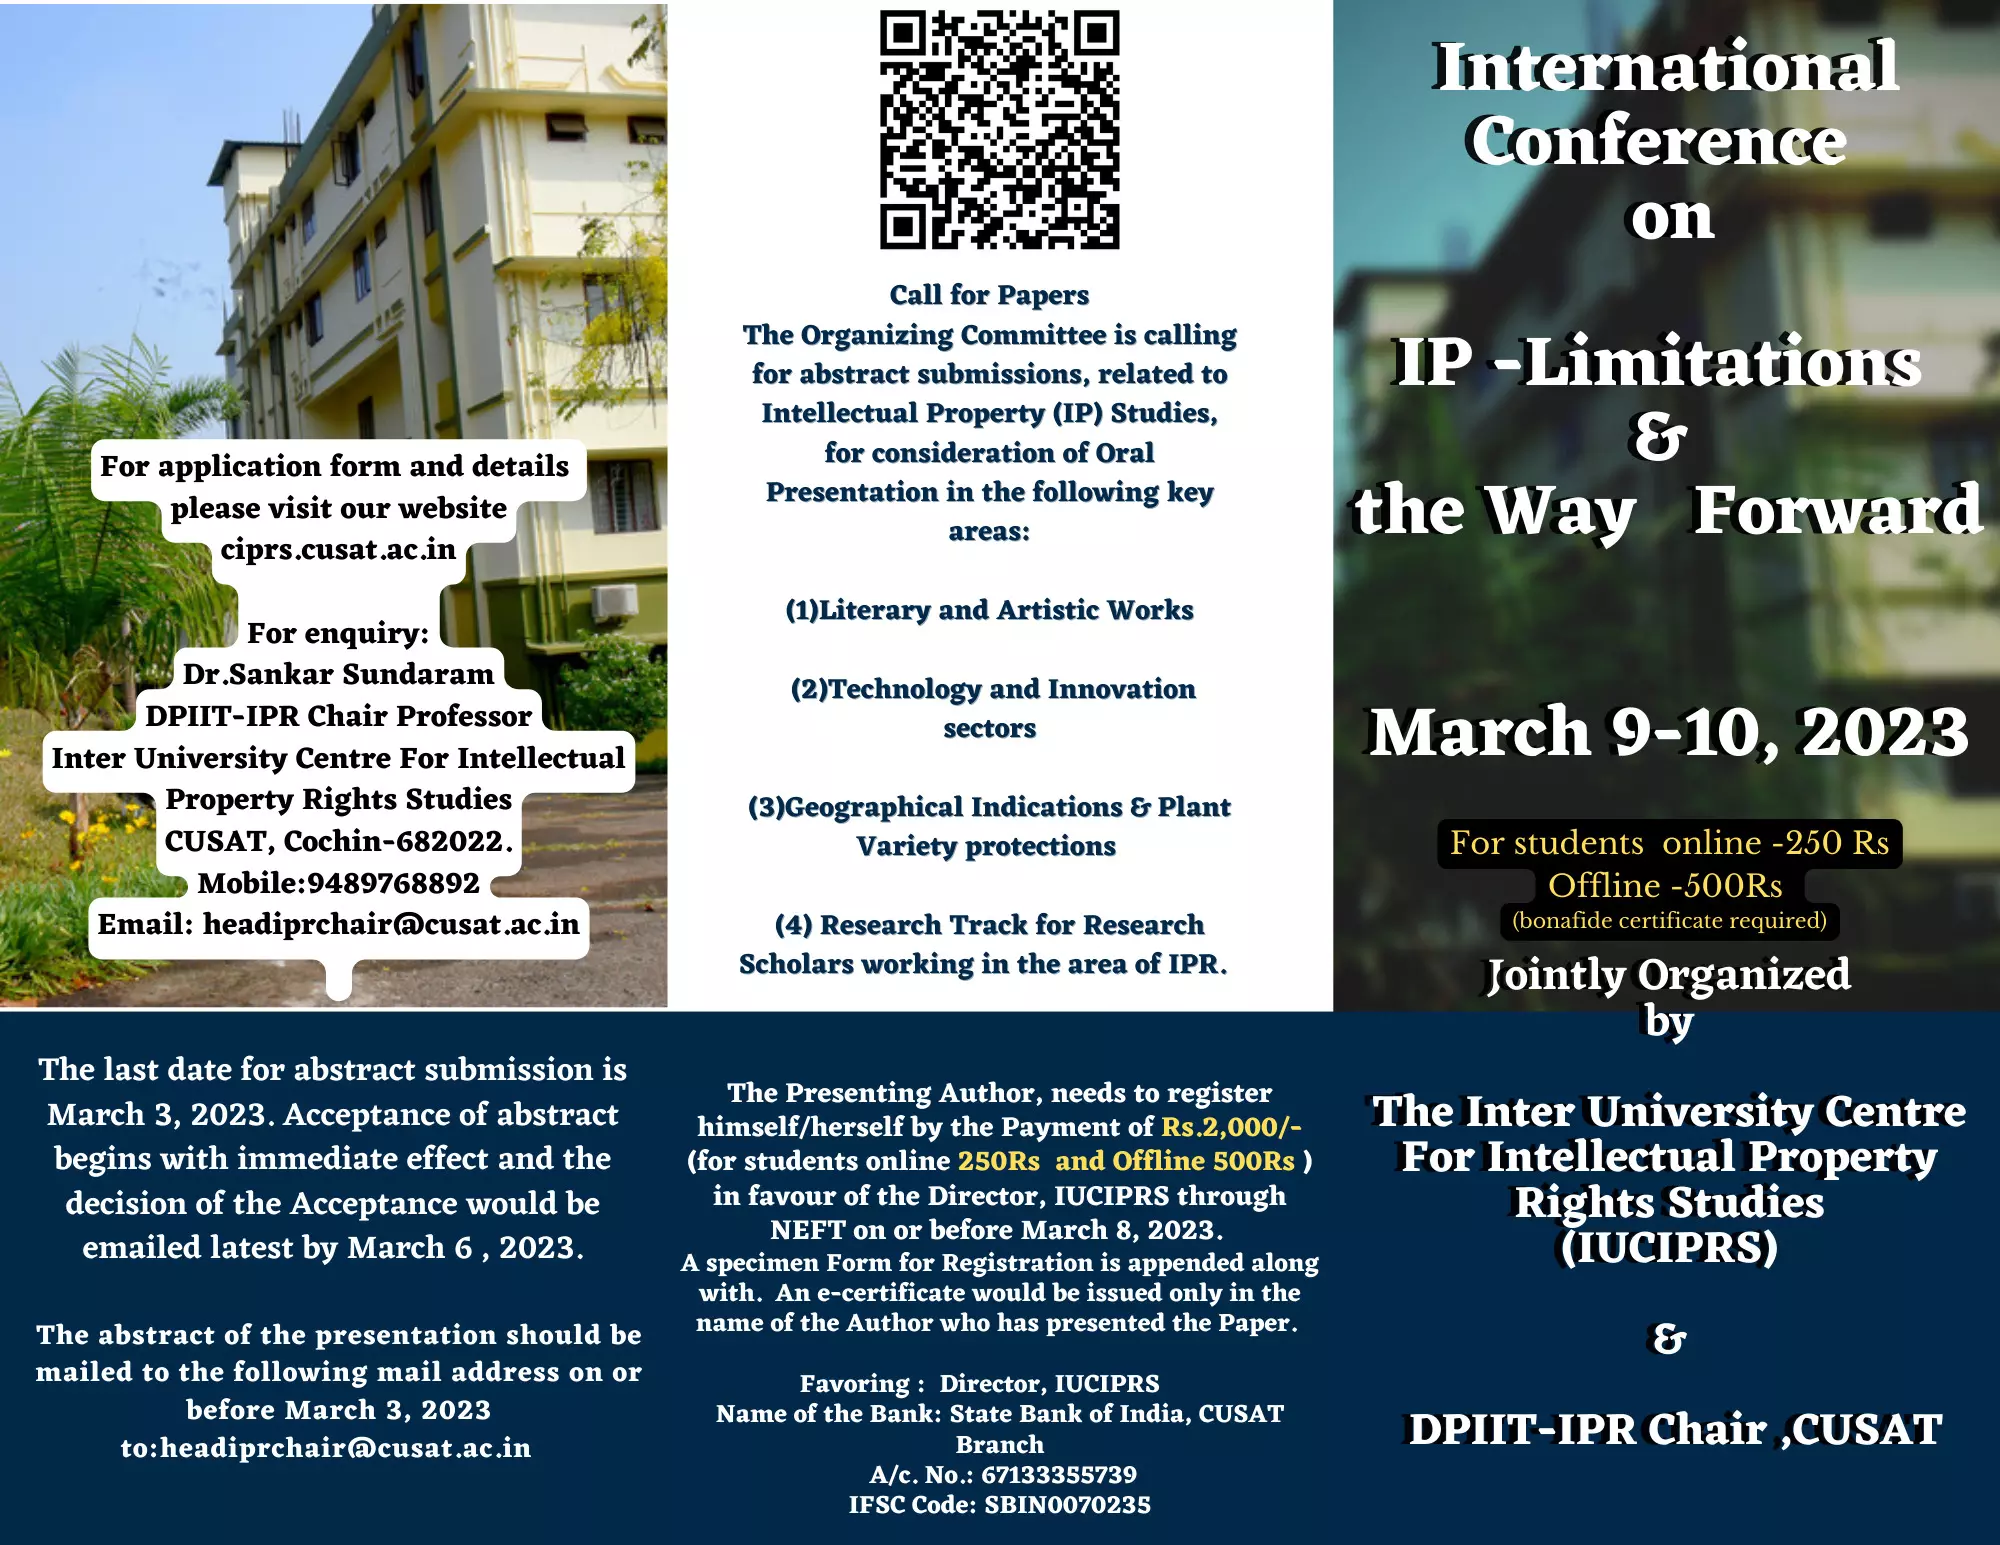 Call for Paper | International Conference on IP 2023 - Limitations & the Way Forward | IUCIPRS | Cochin University Of Science And Technology